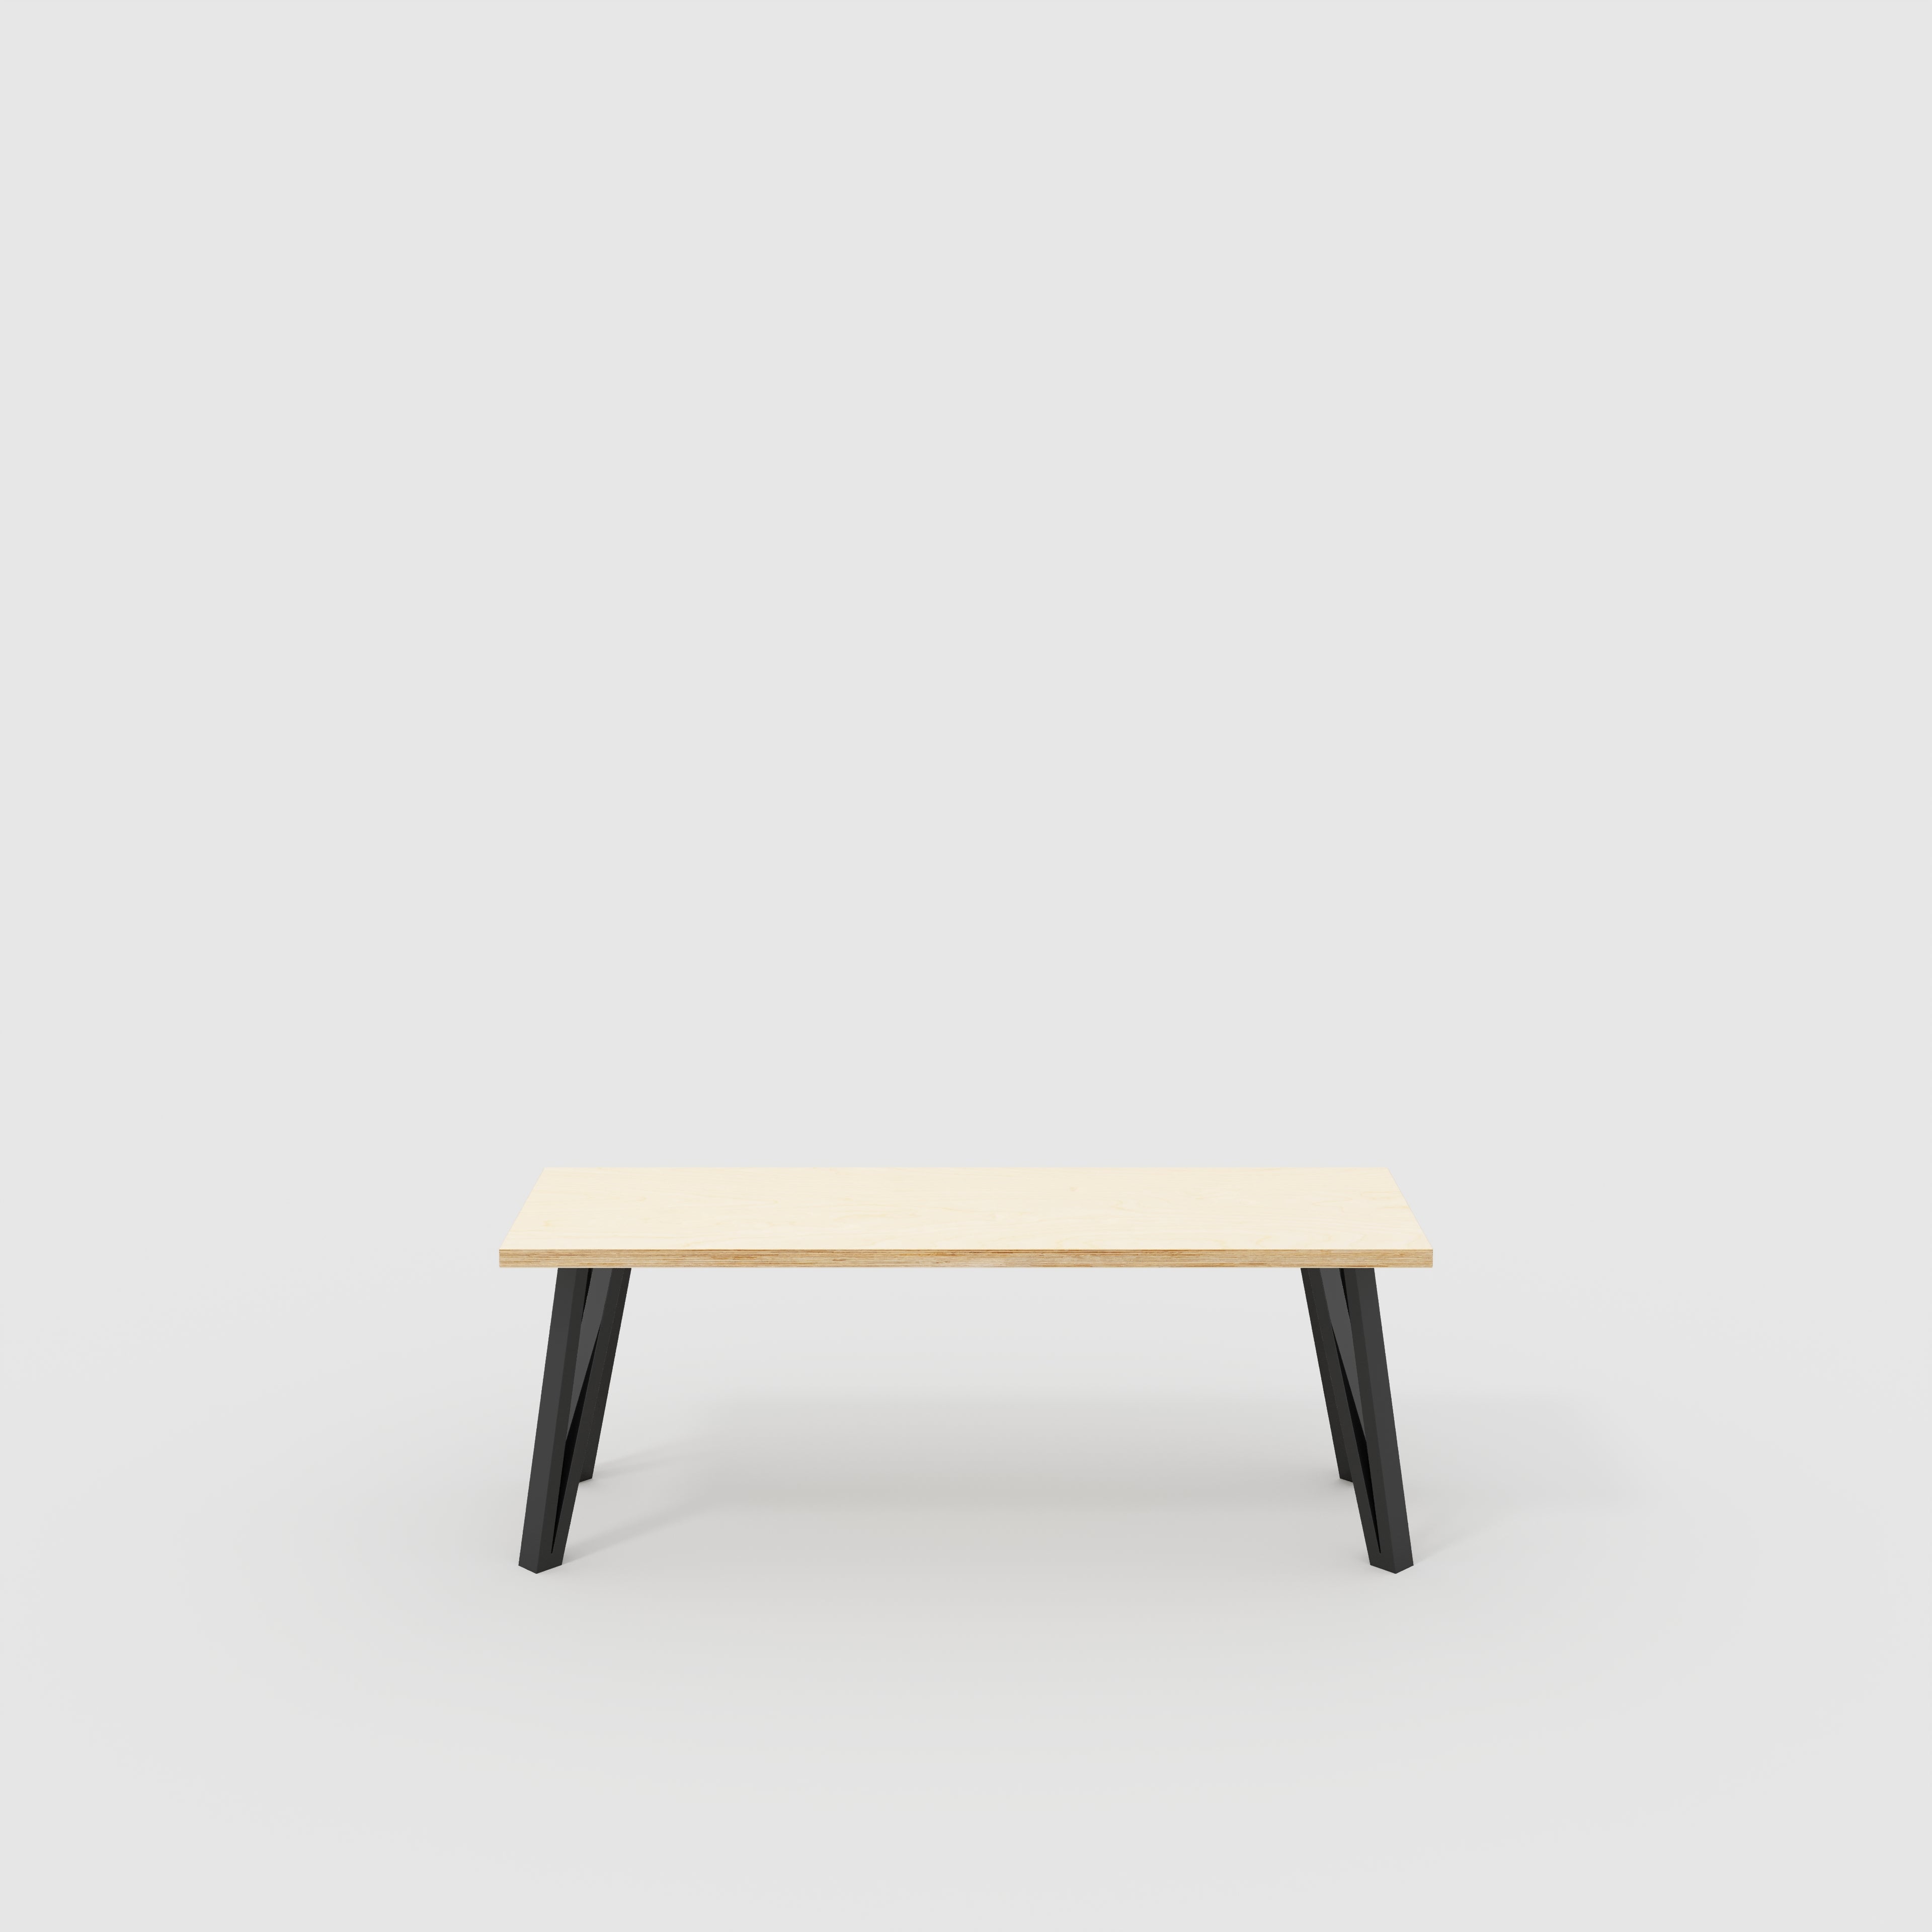 Bench Seat with Black Box Hairpin Legs - Plywood Birch - 1200(w) x 400(d) x 450(h)